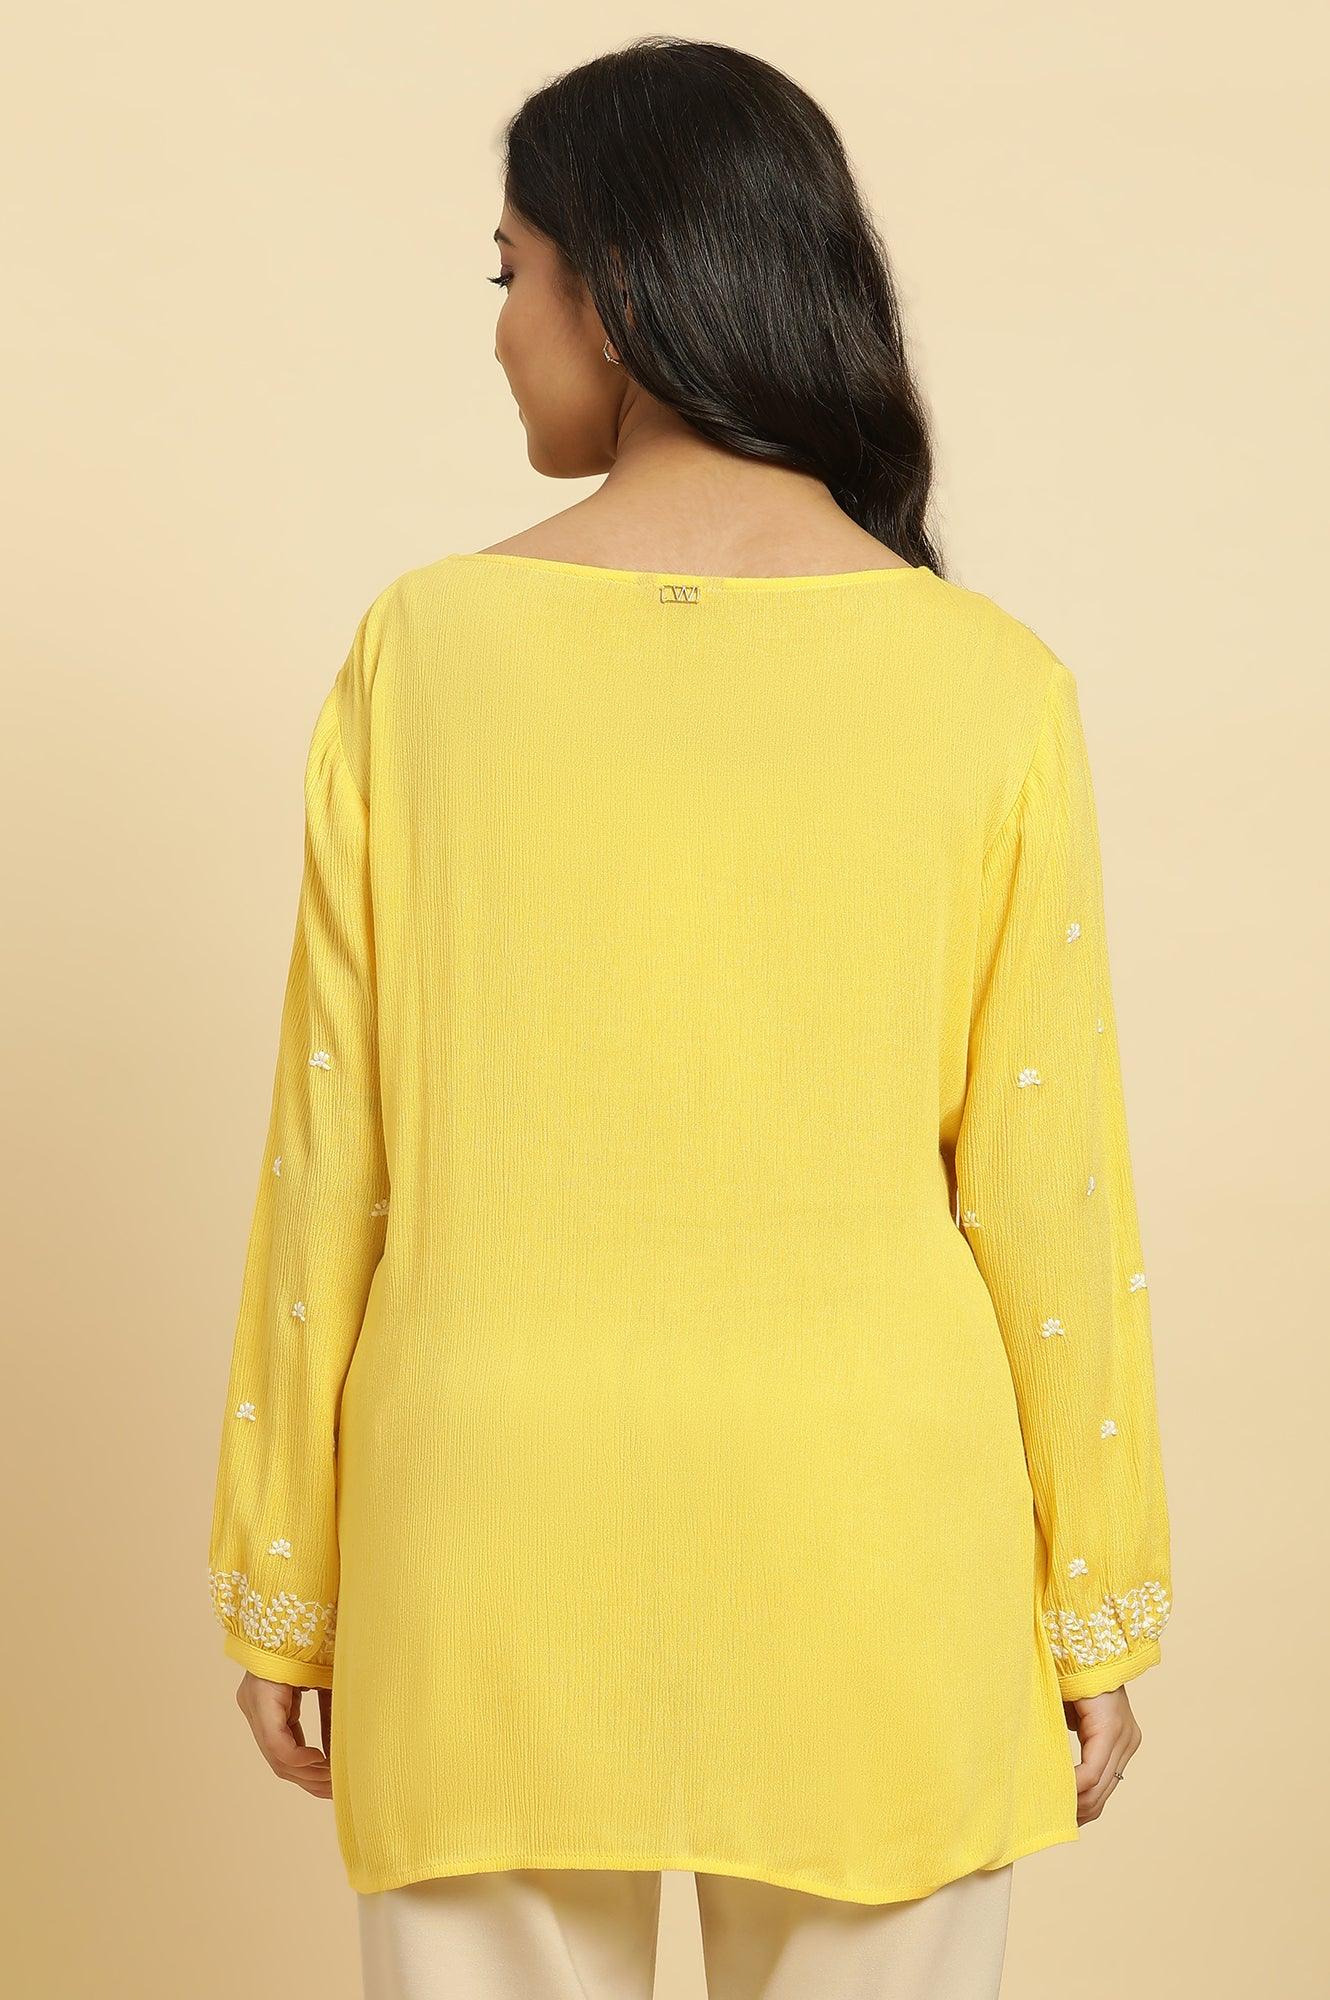 Yellow Summer Top With White Floral Embroidery - wforwoman